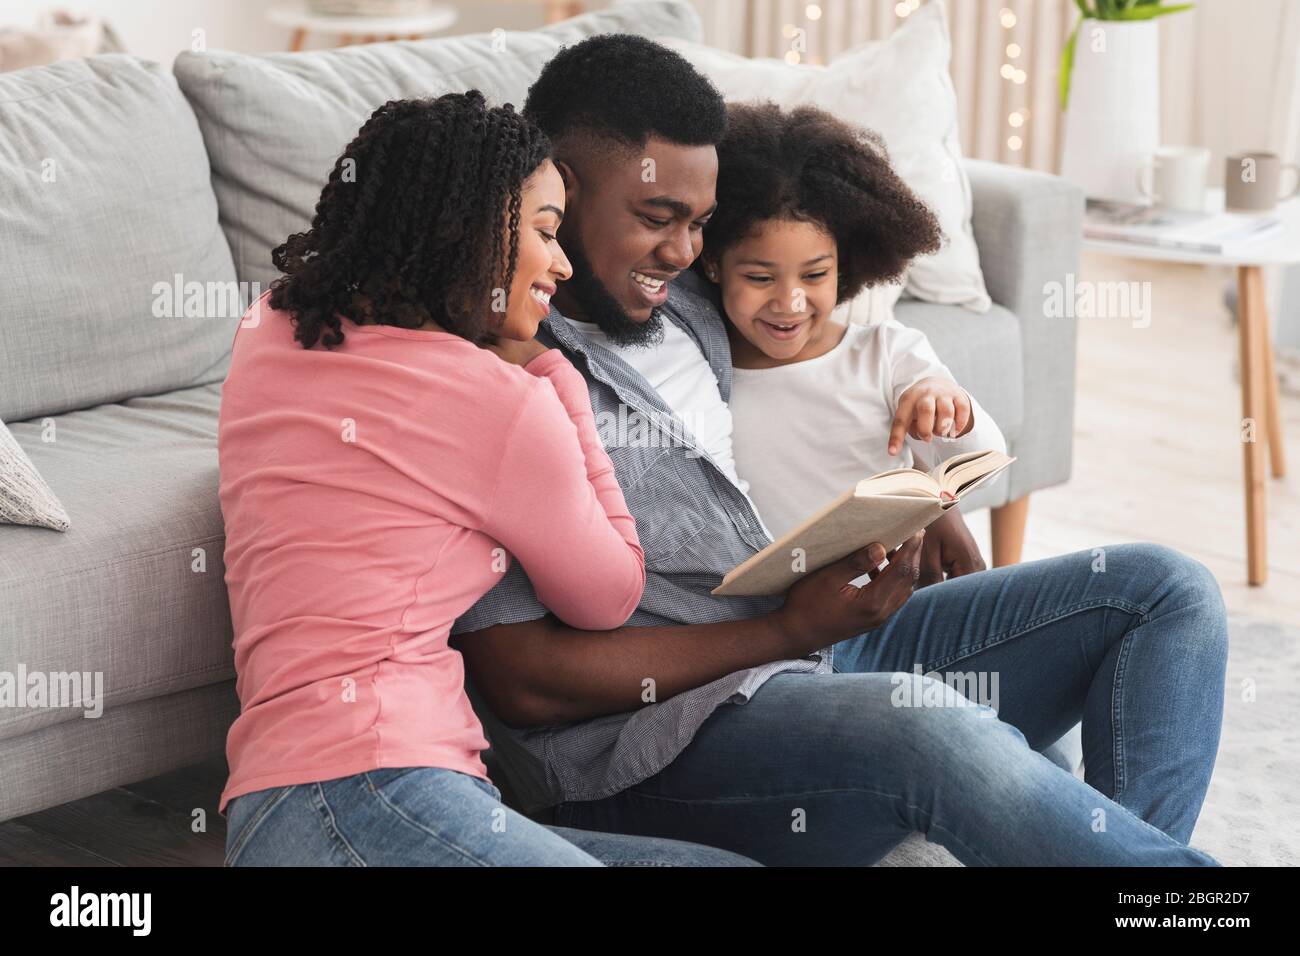 Happy black family reading book together, sitting on floor in living room Stock Photo